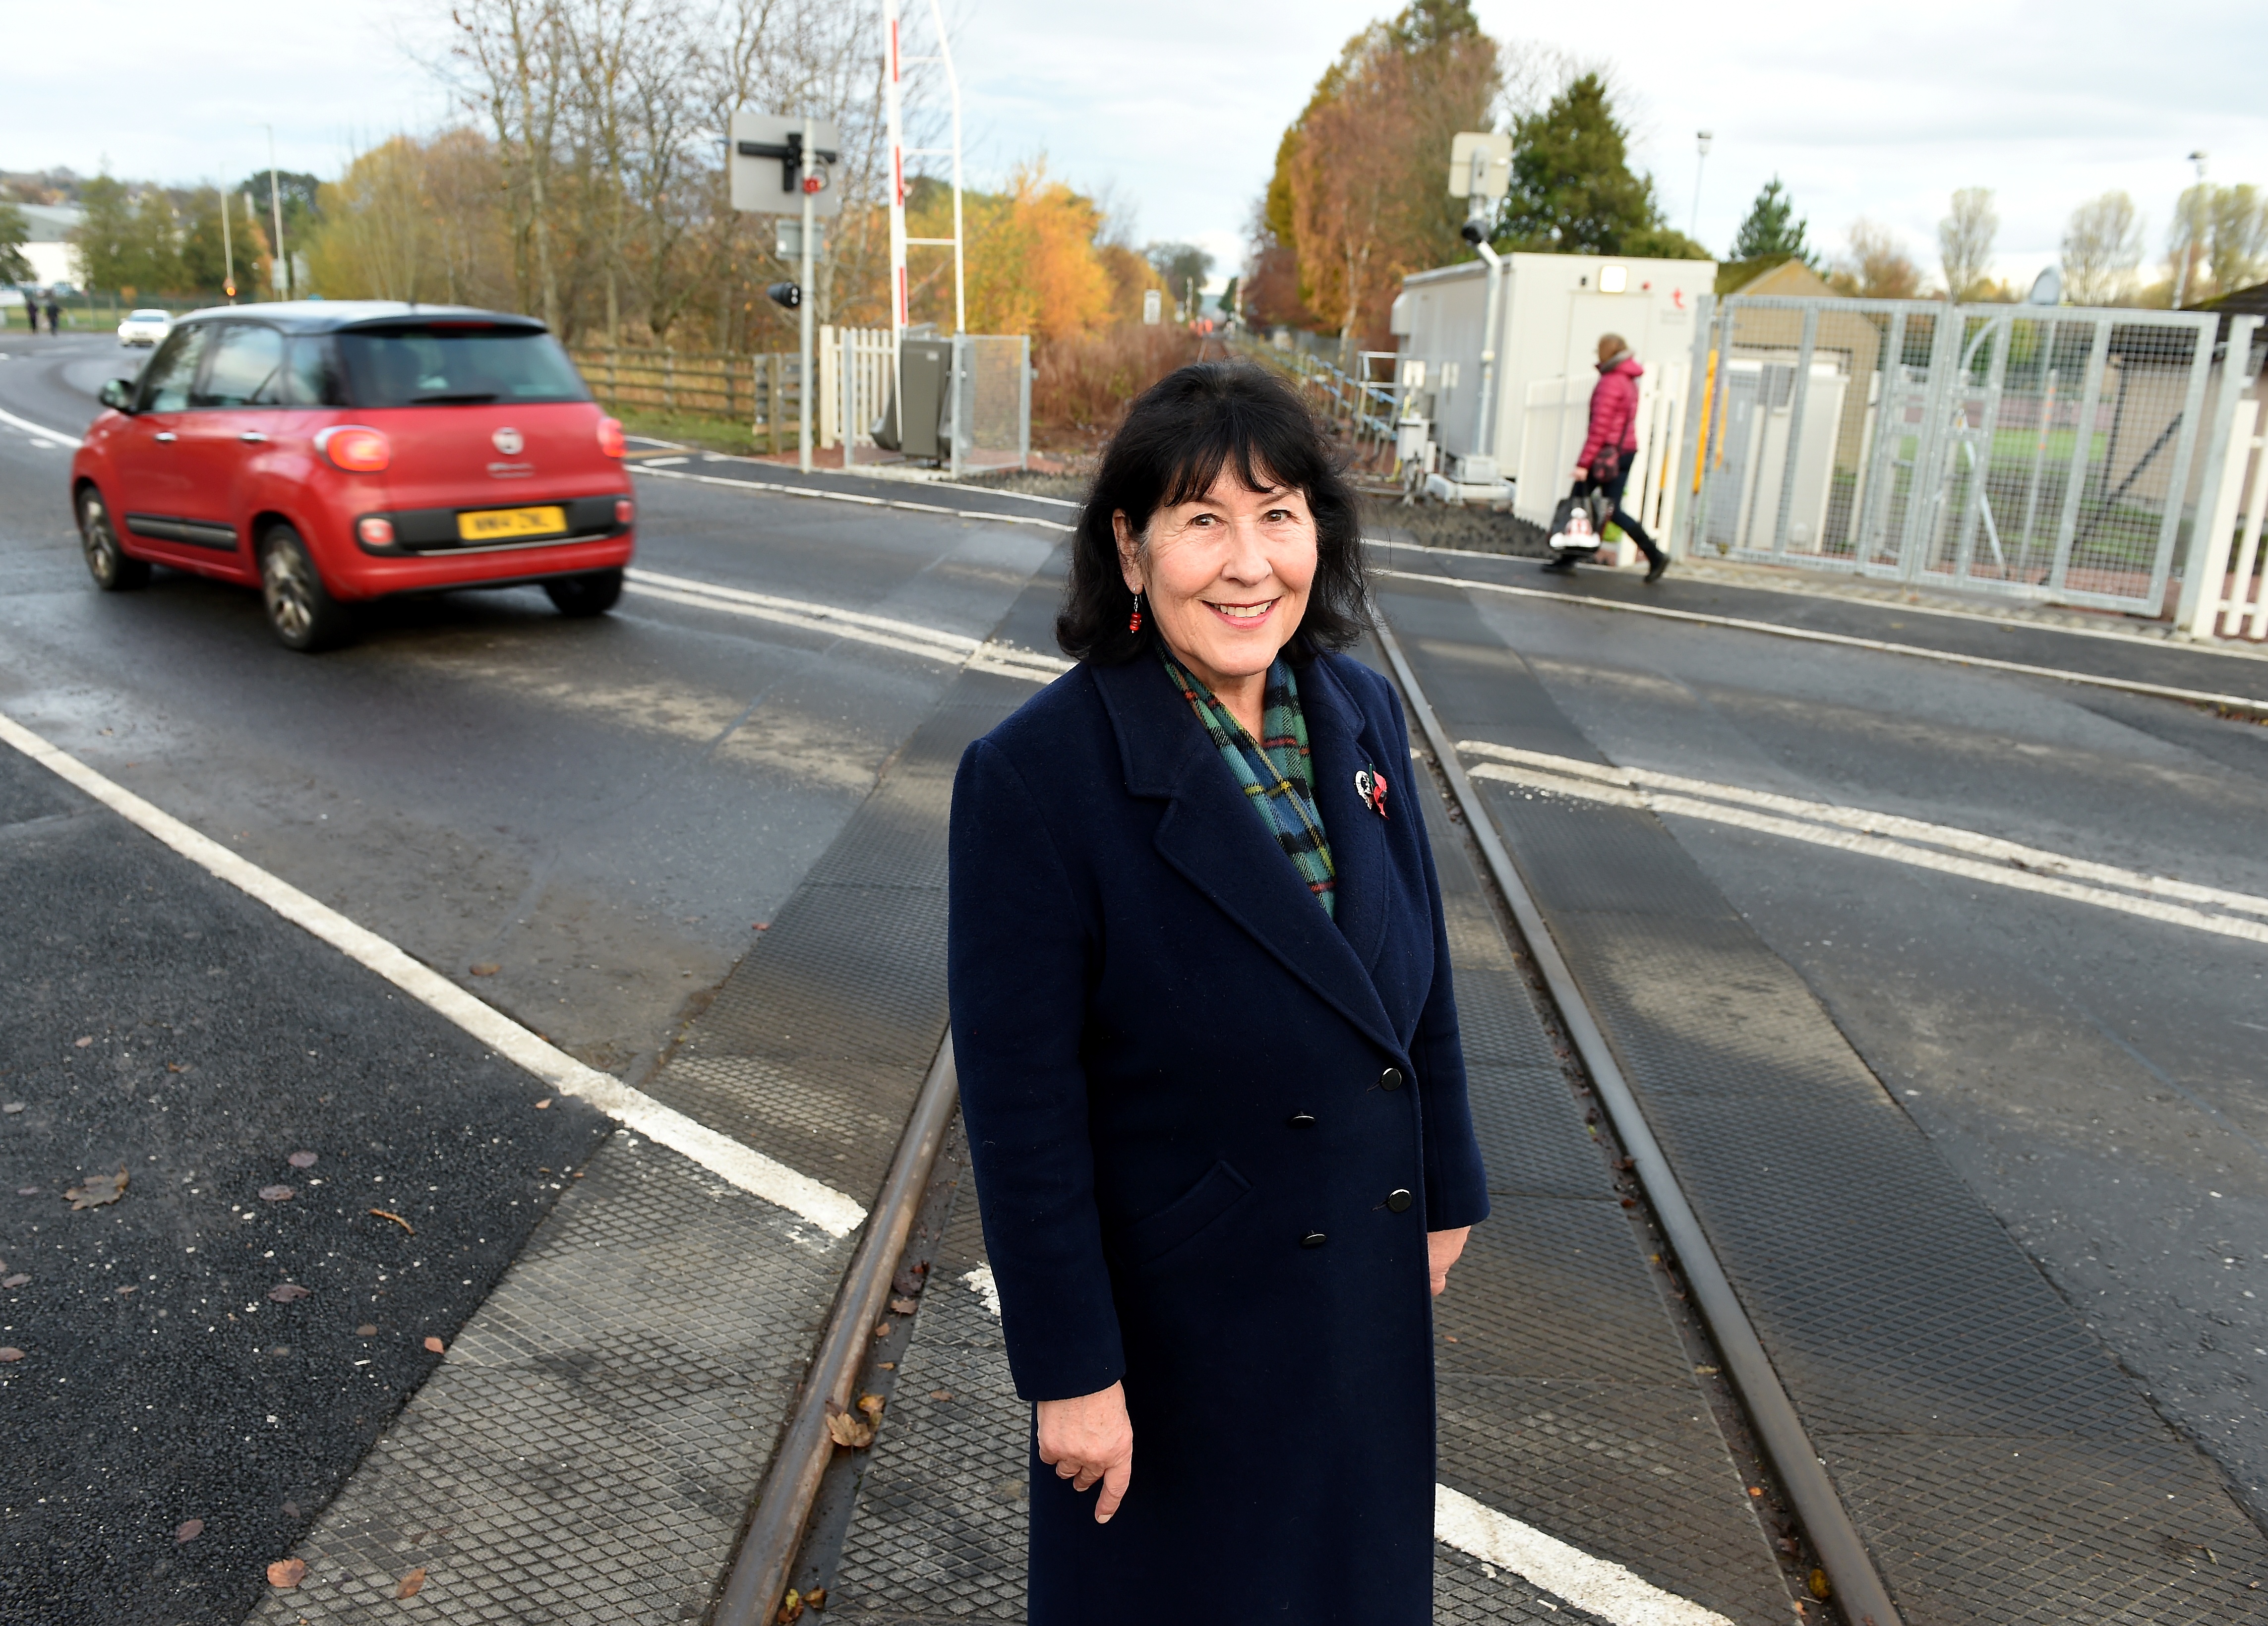 Councillor Paterson says she is "absolutely delighted" with the improvements made to the communities level crossings.